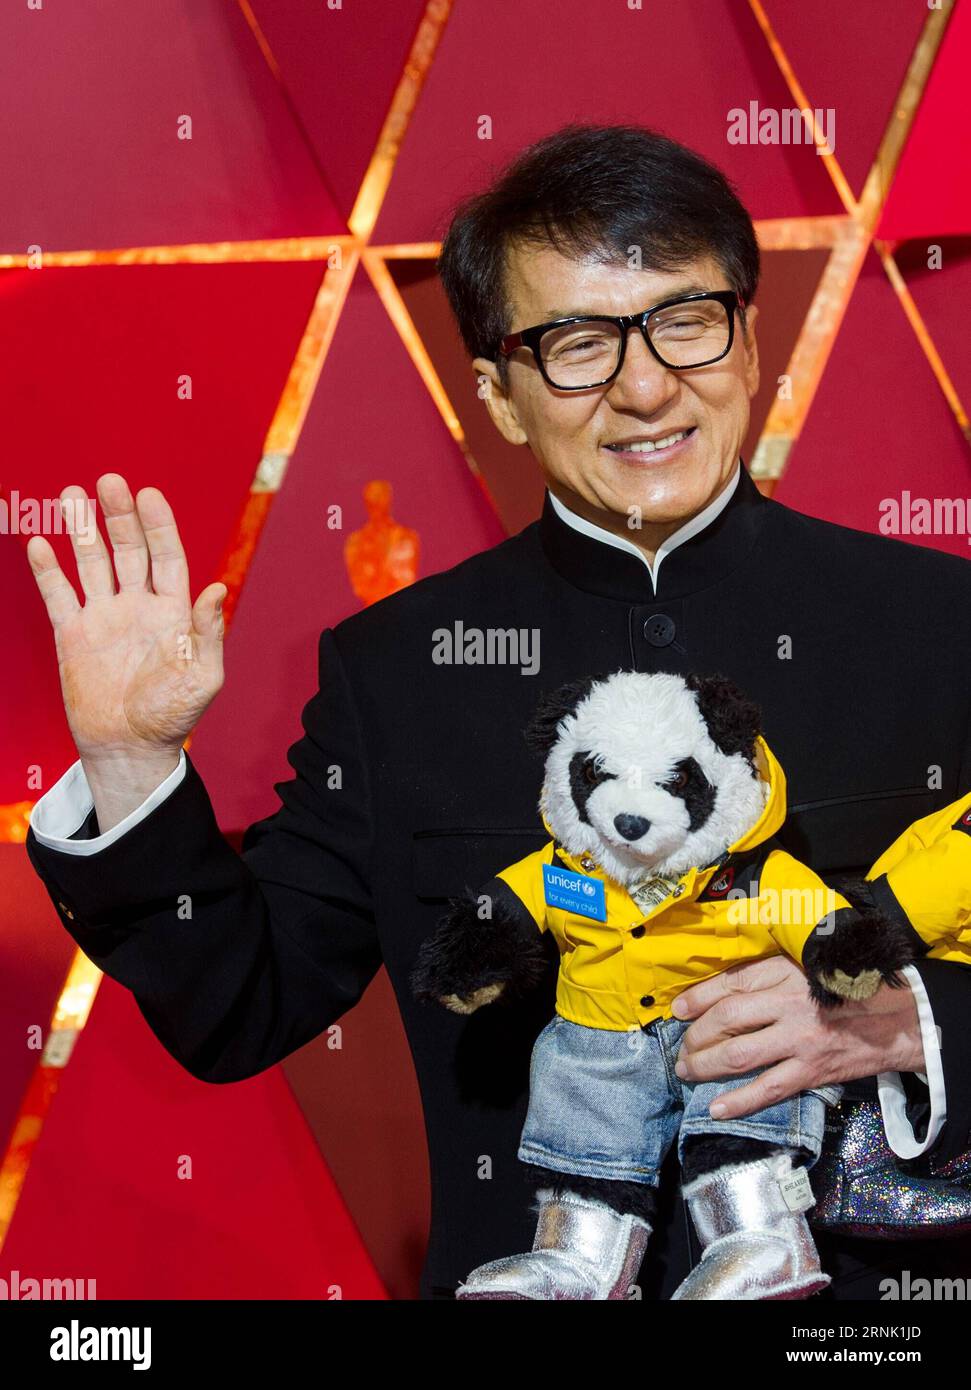 Jackie Chan to Star in Action Comedy 'Panda Plan' – The Hollywood Reporter